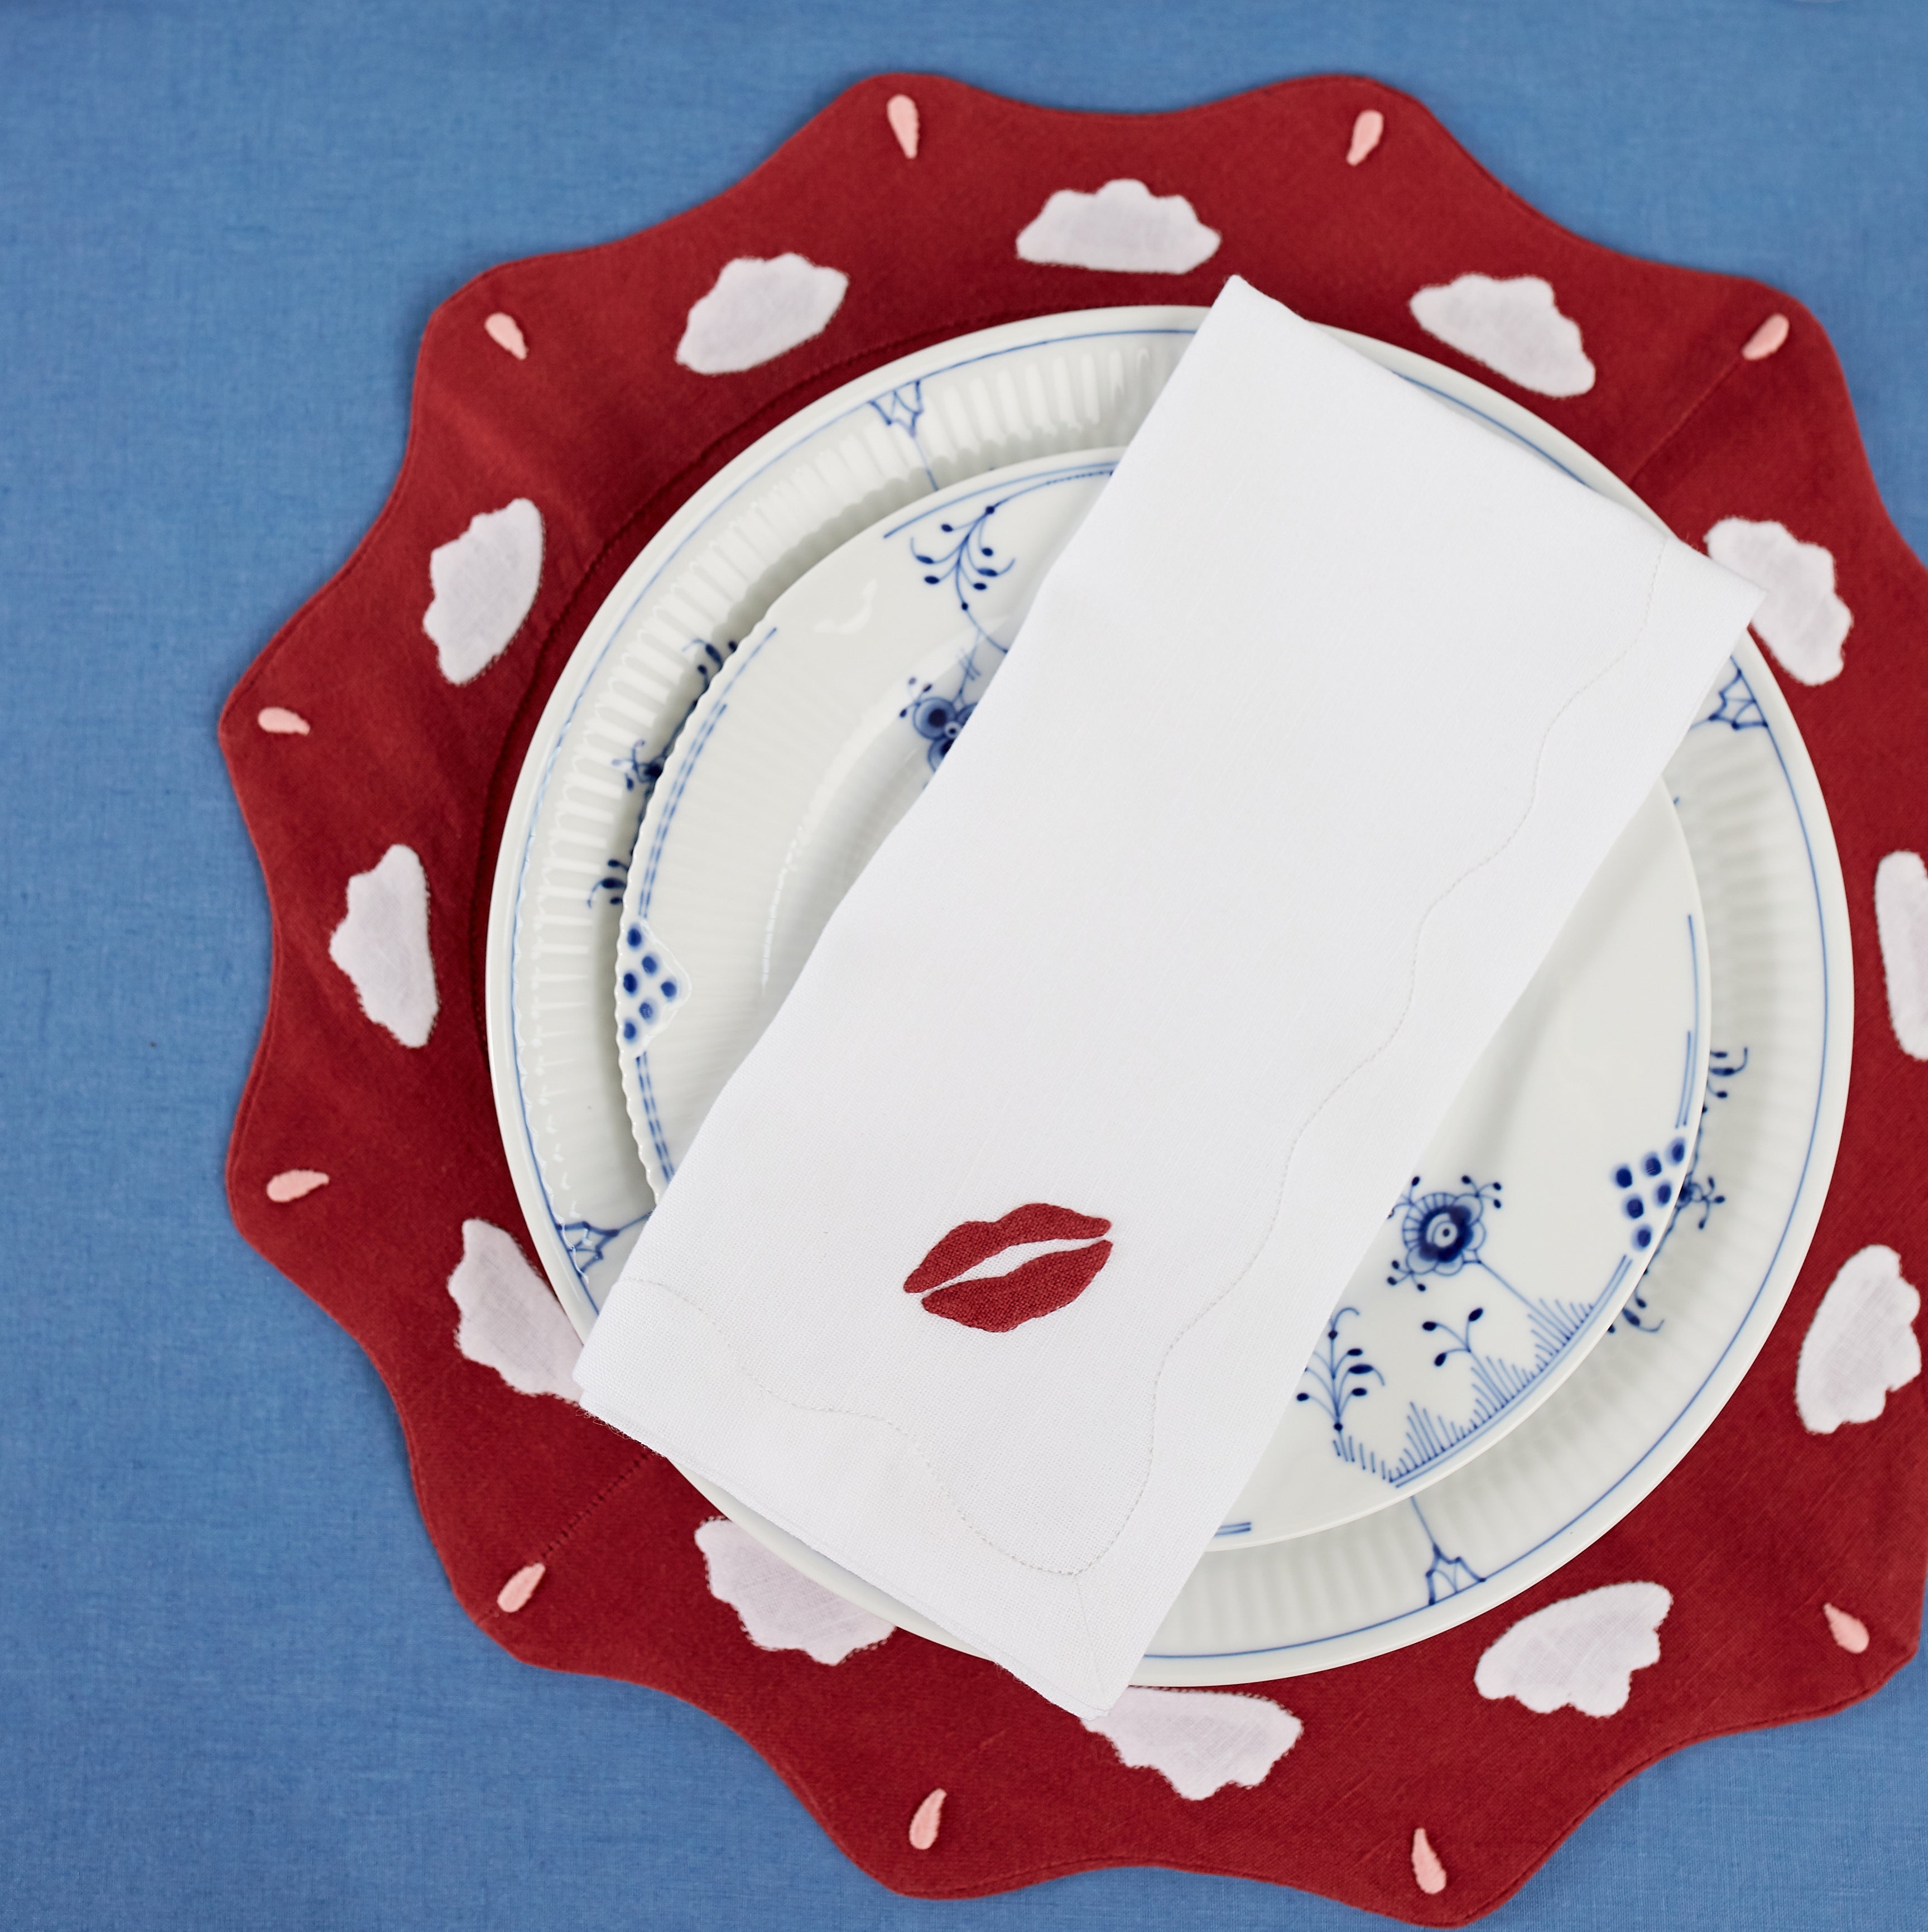 Sicily Scallop Placemats Burgundy, Set of 2